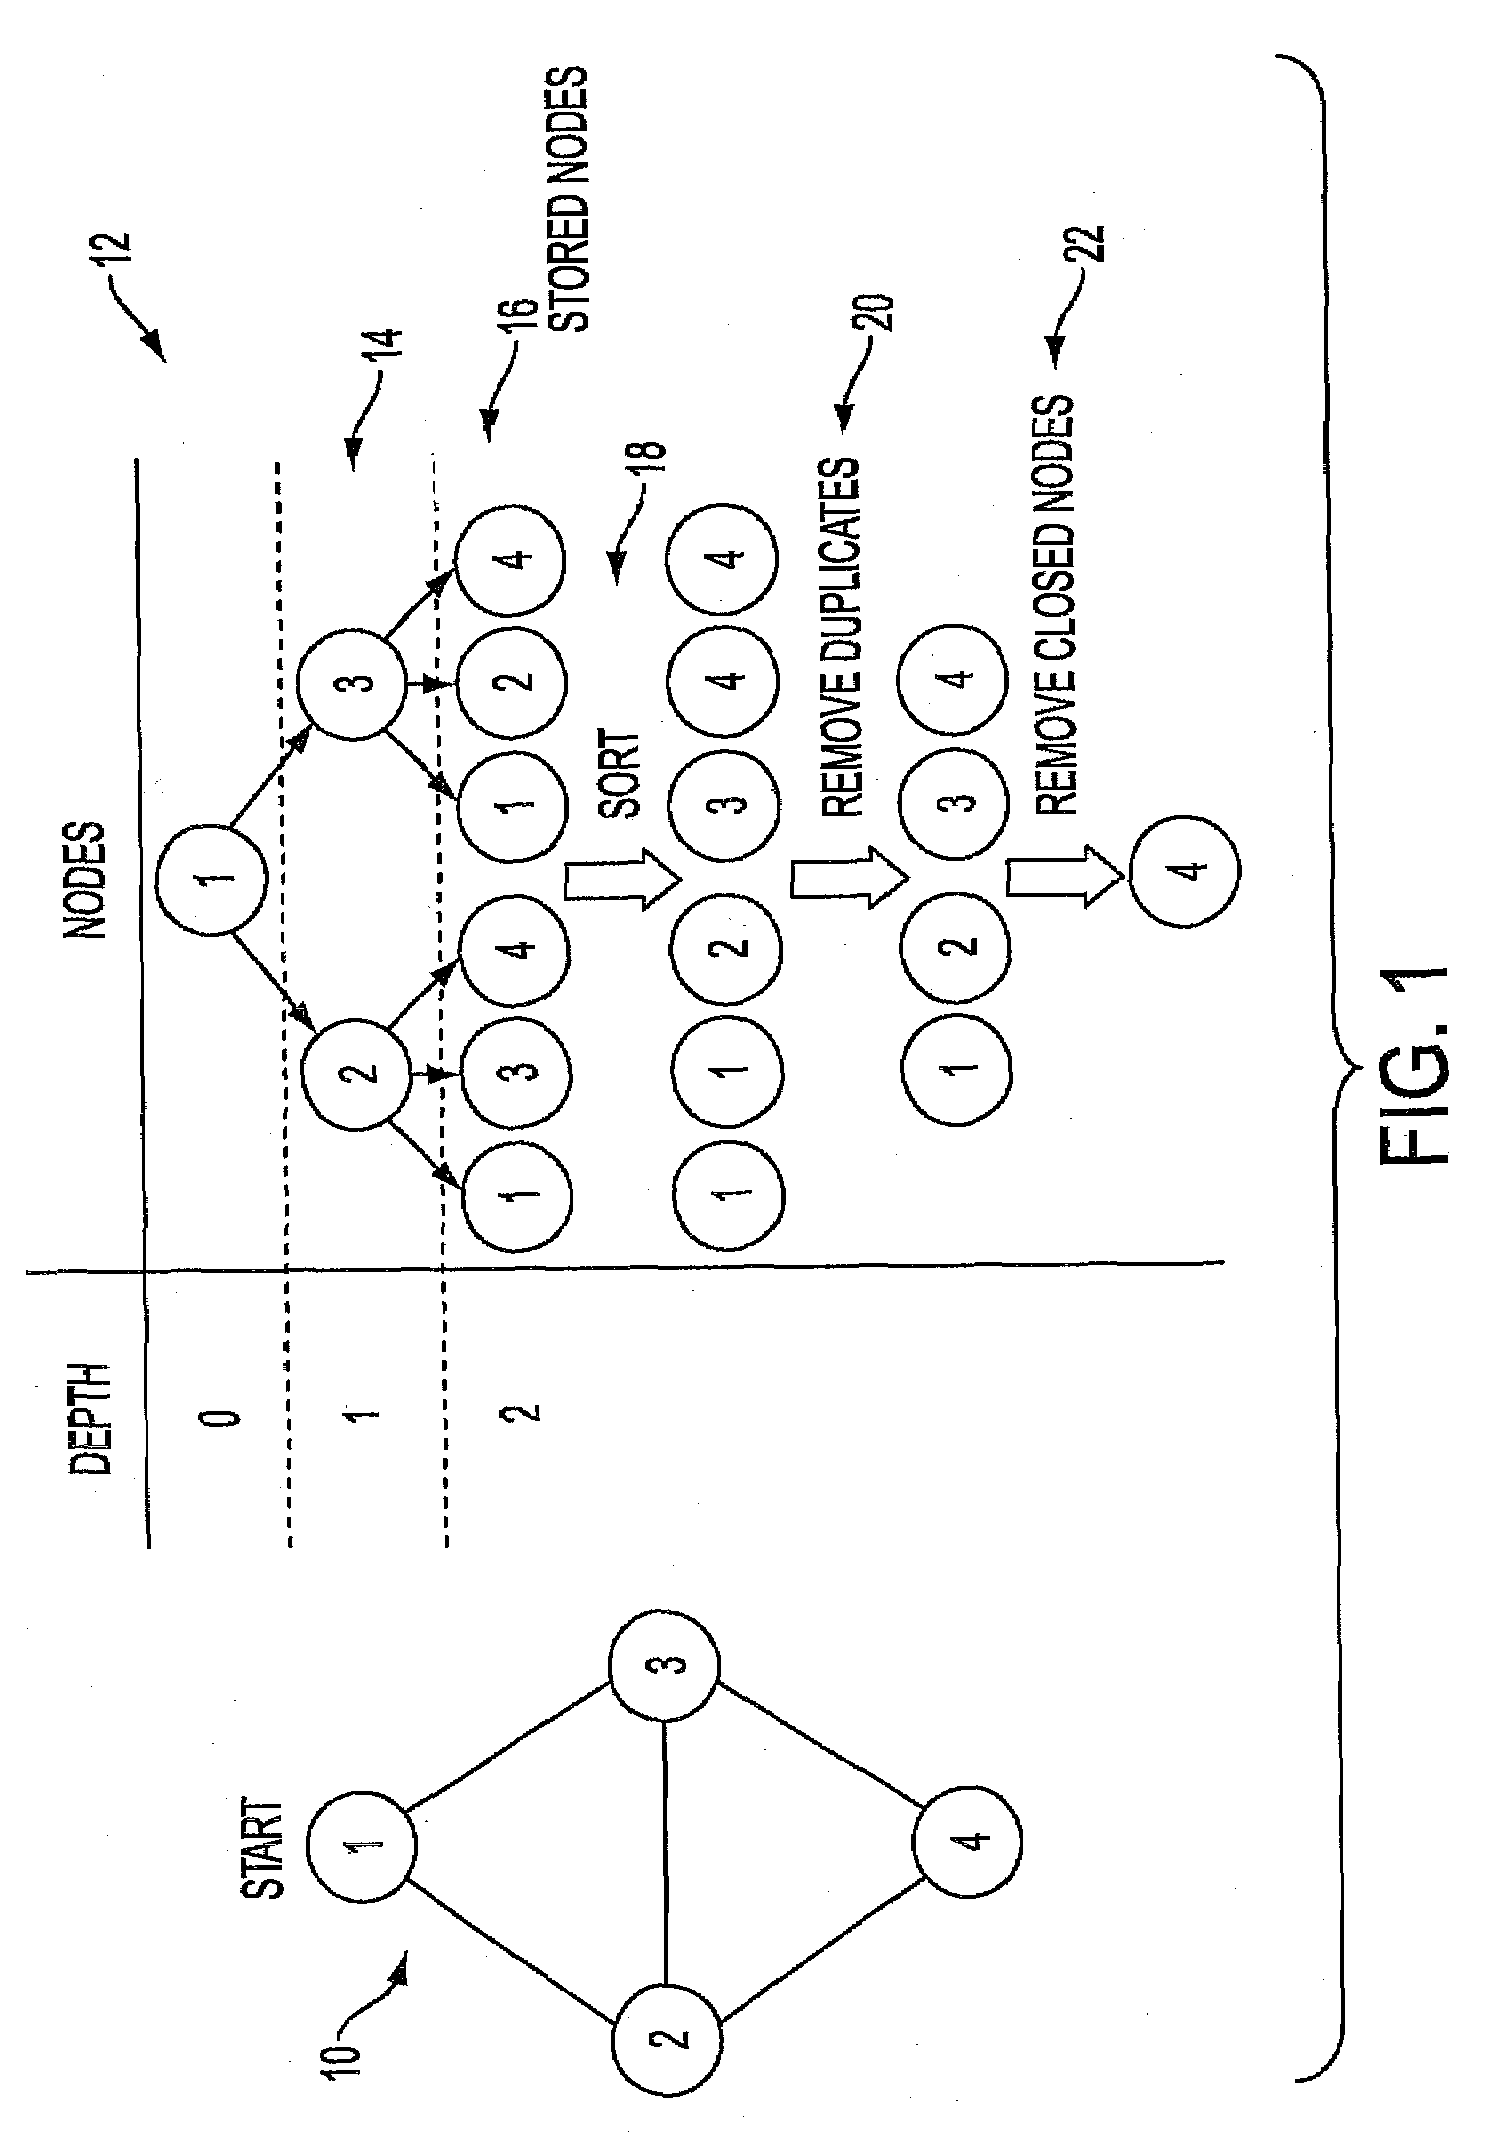 System and method for external-memory graph search utilizing edge partitioning